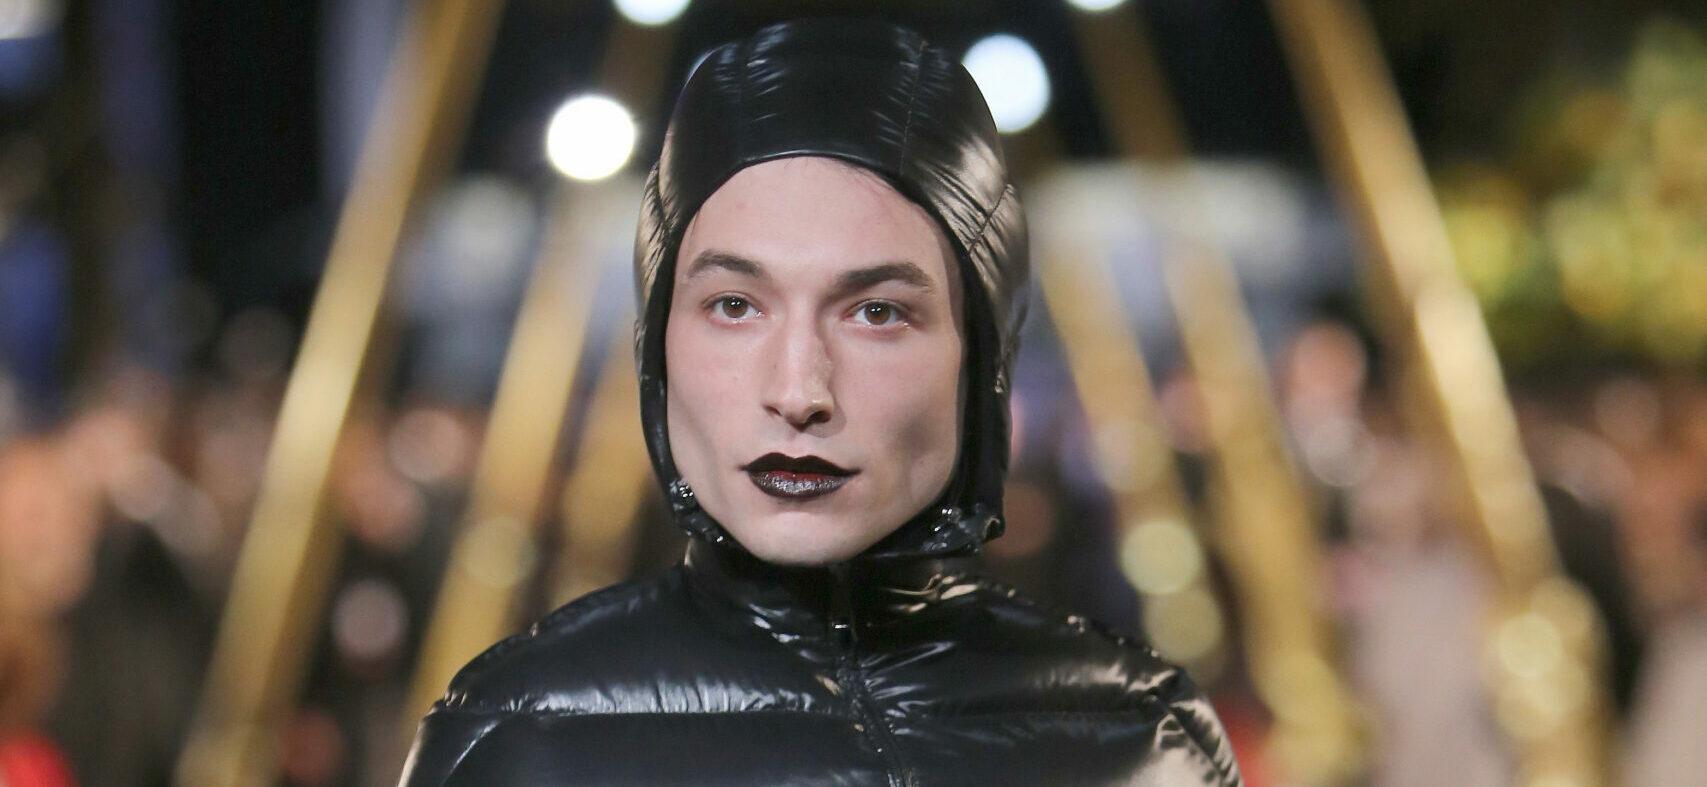 Ezra Miller Is Grateful To Their Supporters For ‘Grace’ At First Public Appearance For ‘The Flash’ Premiere